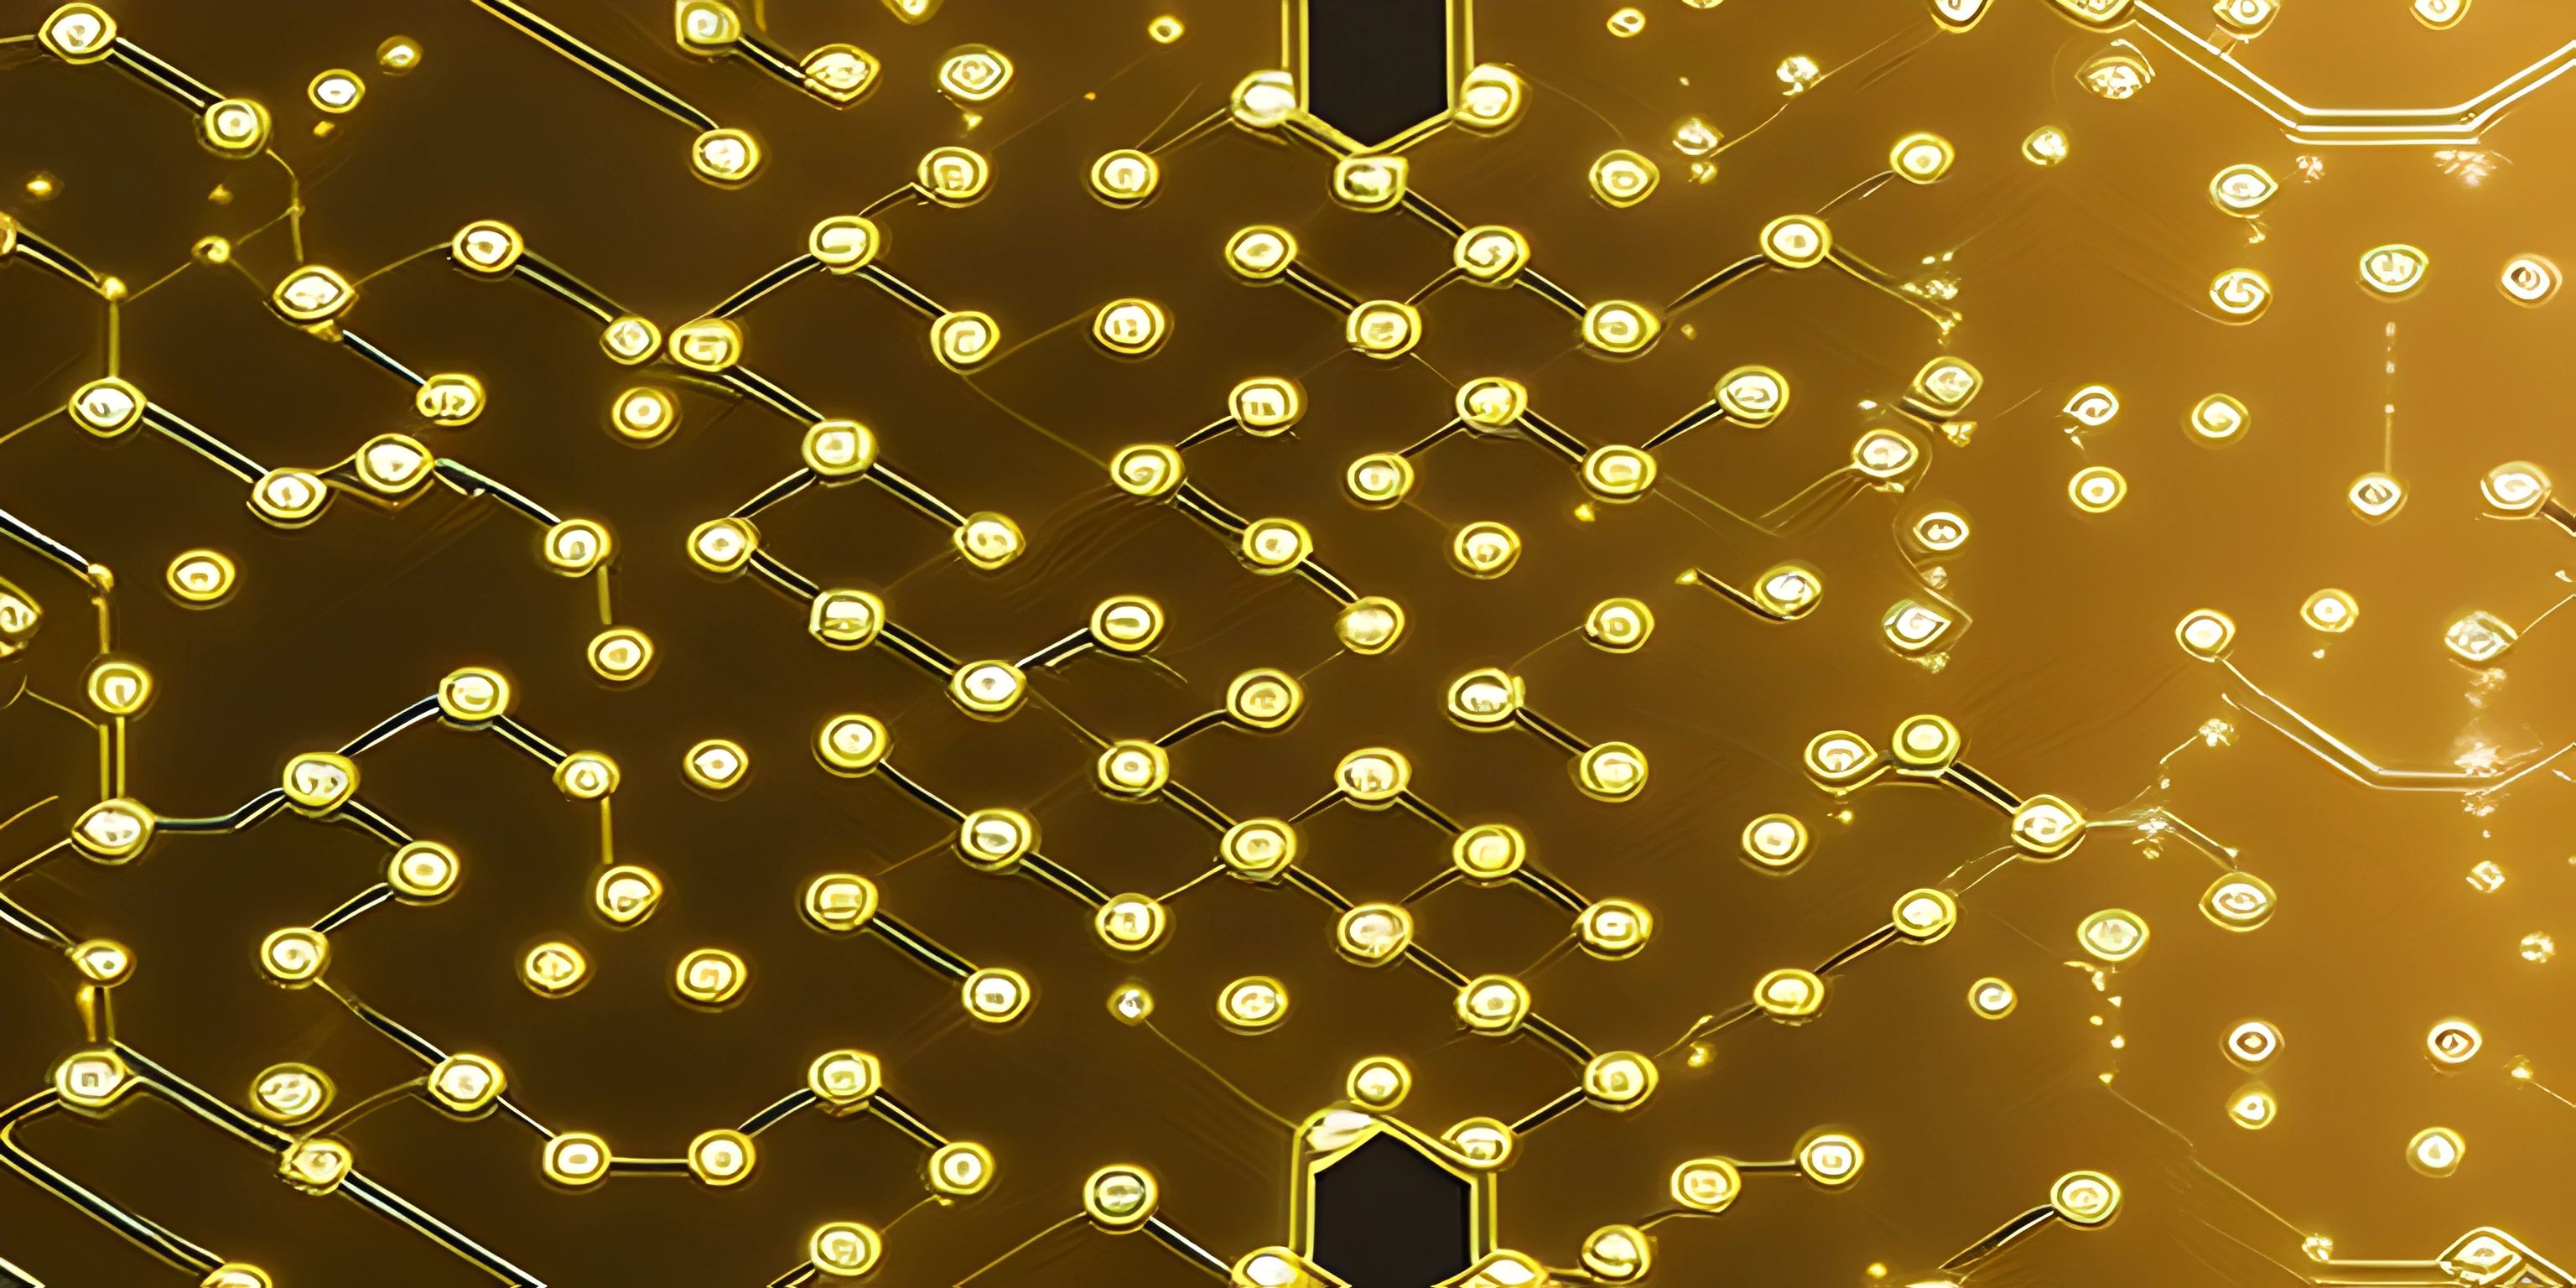 many lights shine in the shape of circles and dots on a computer board wallpaper